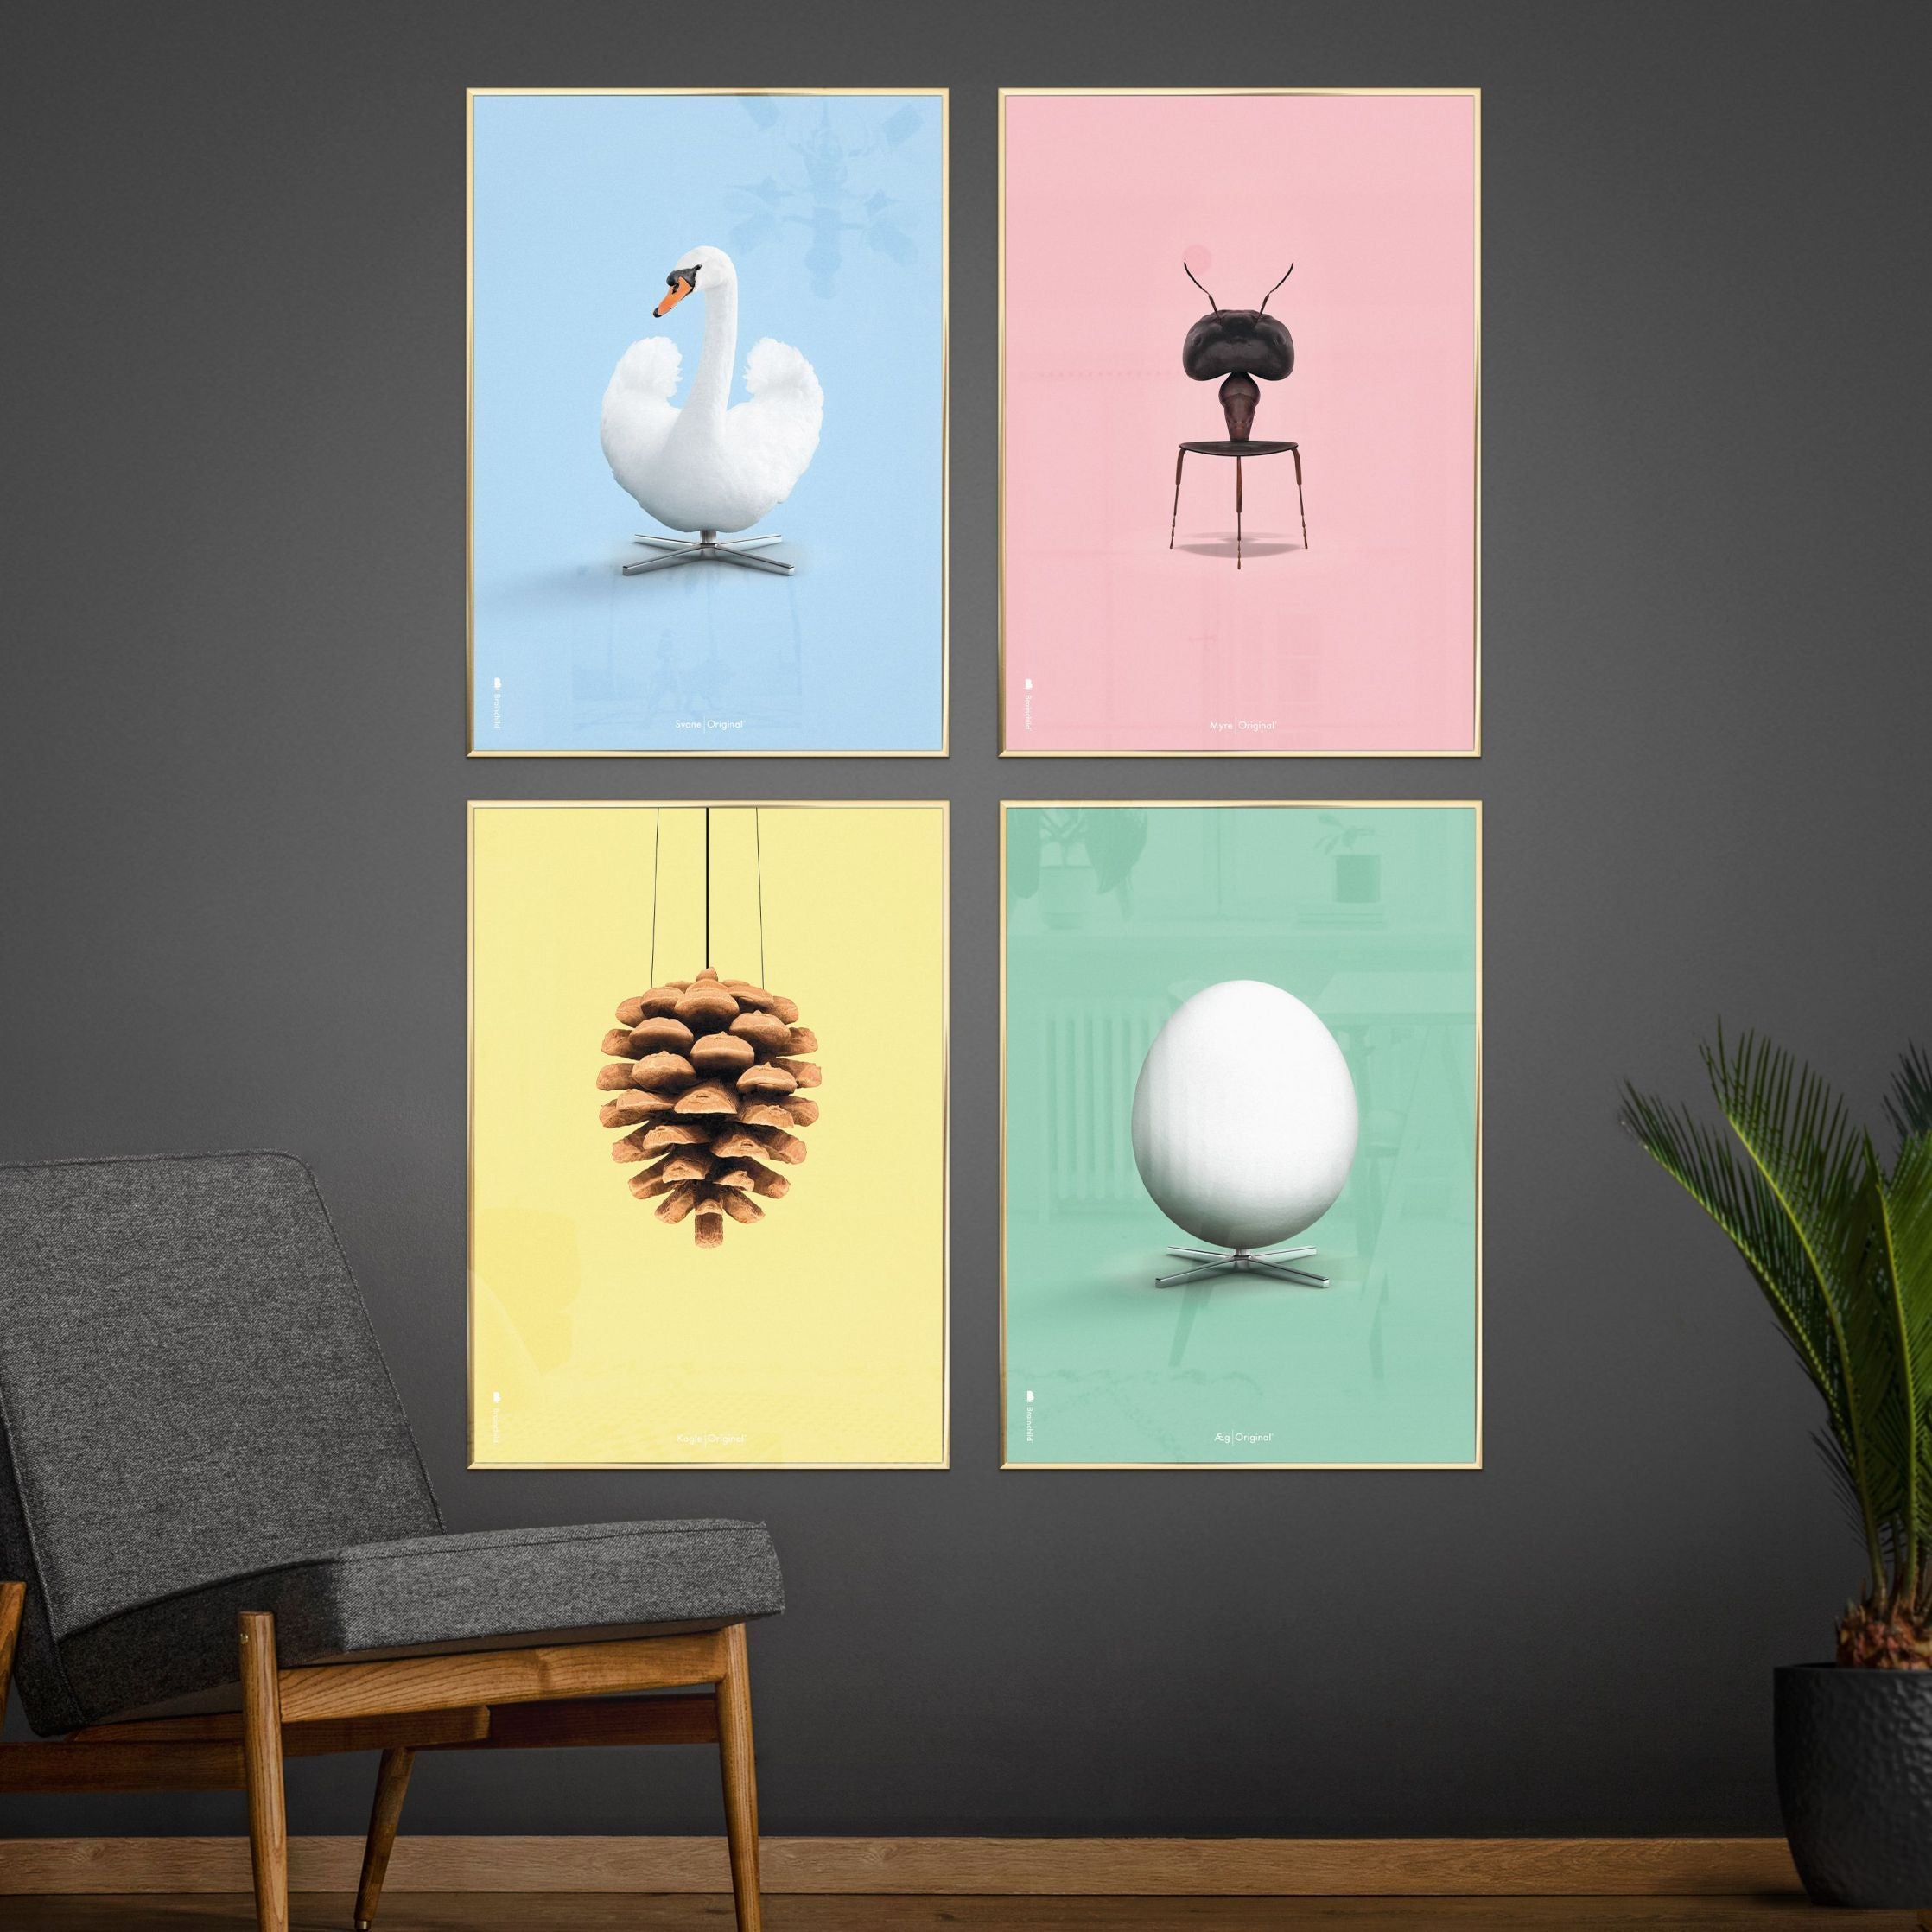 Brainchild Egg Classic Poster Without Frame 70 X100 Cm, Mint Green Background